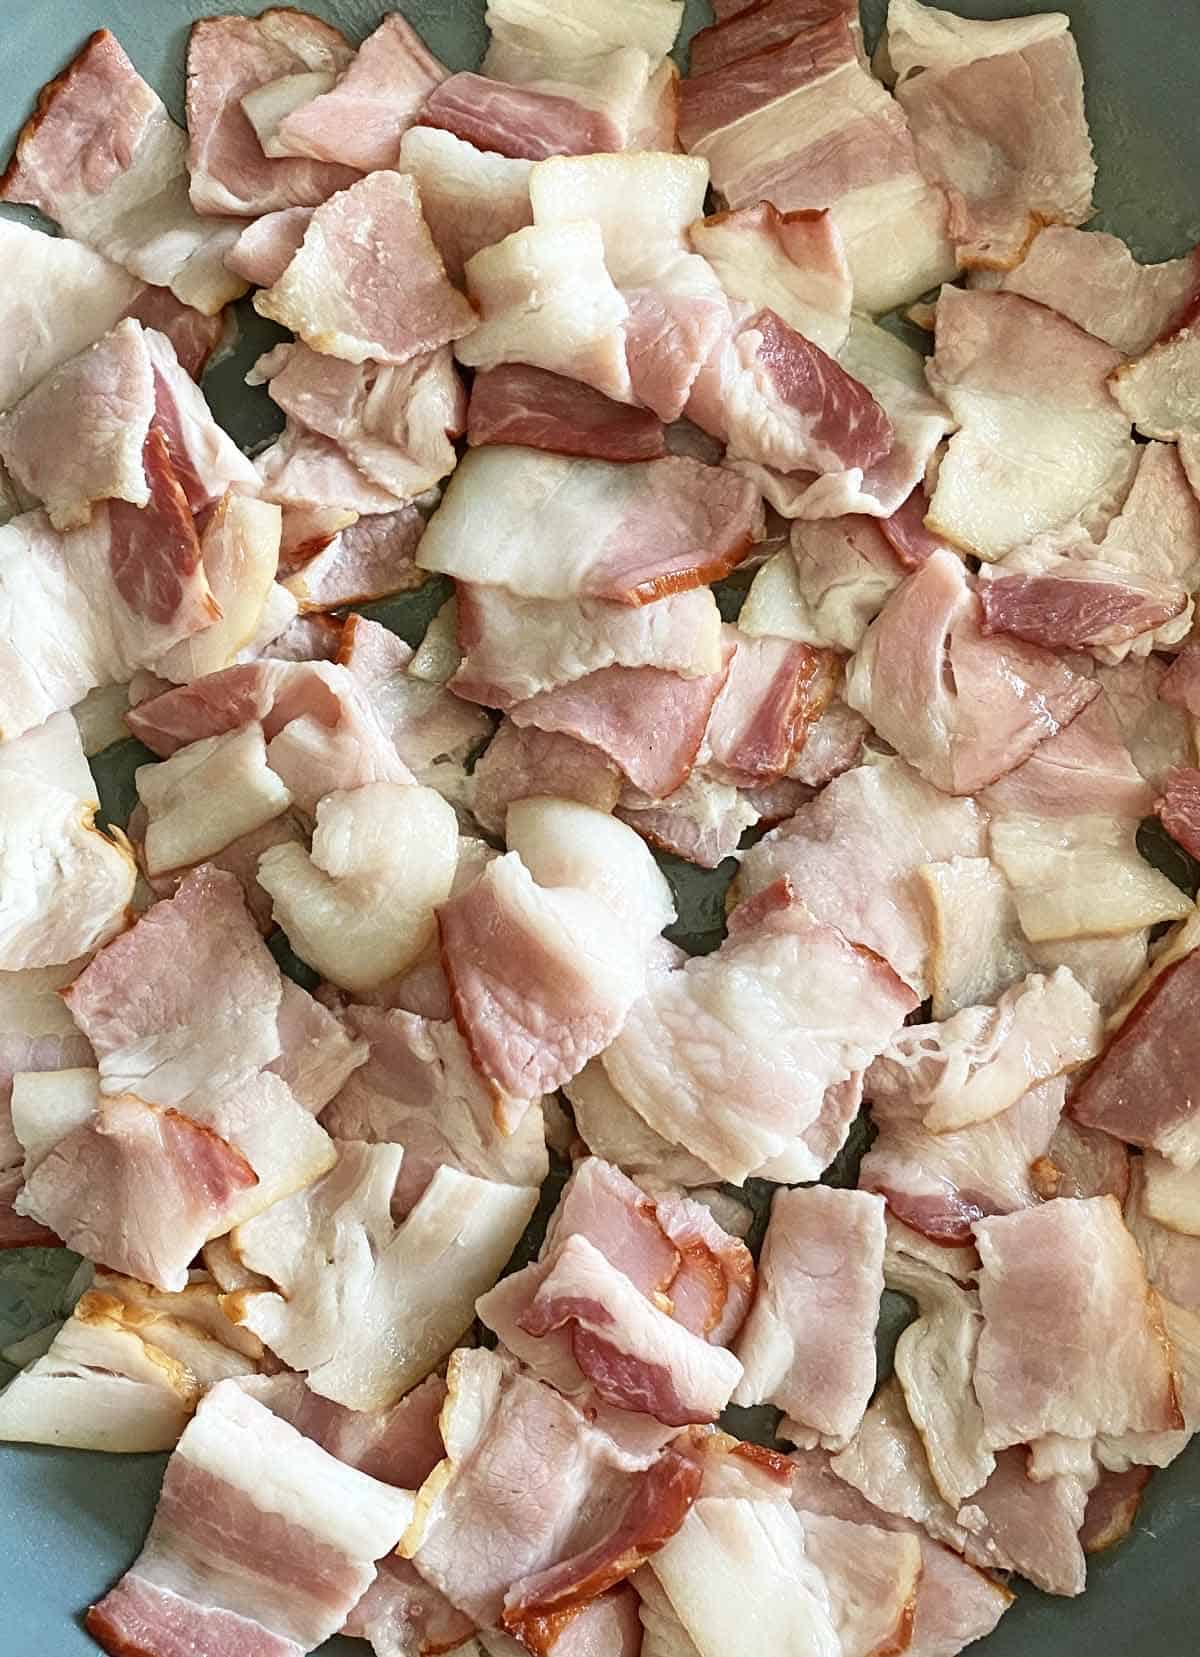 Large pieces of chopped bacon in a gray skillet.